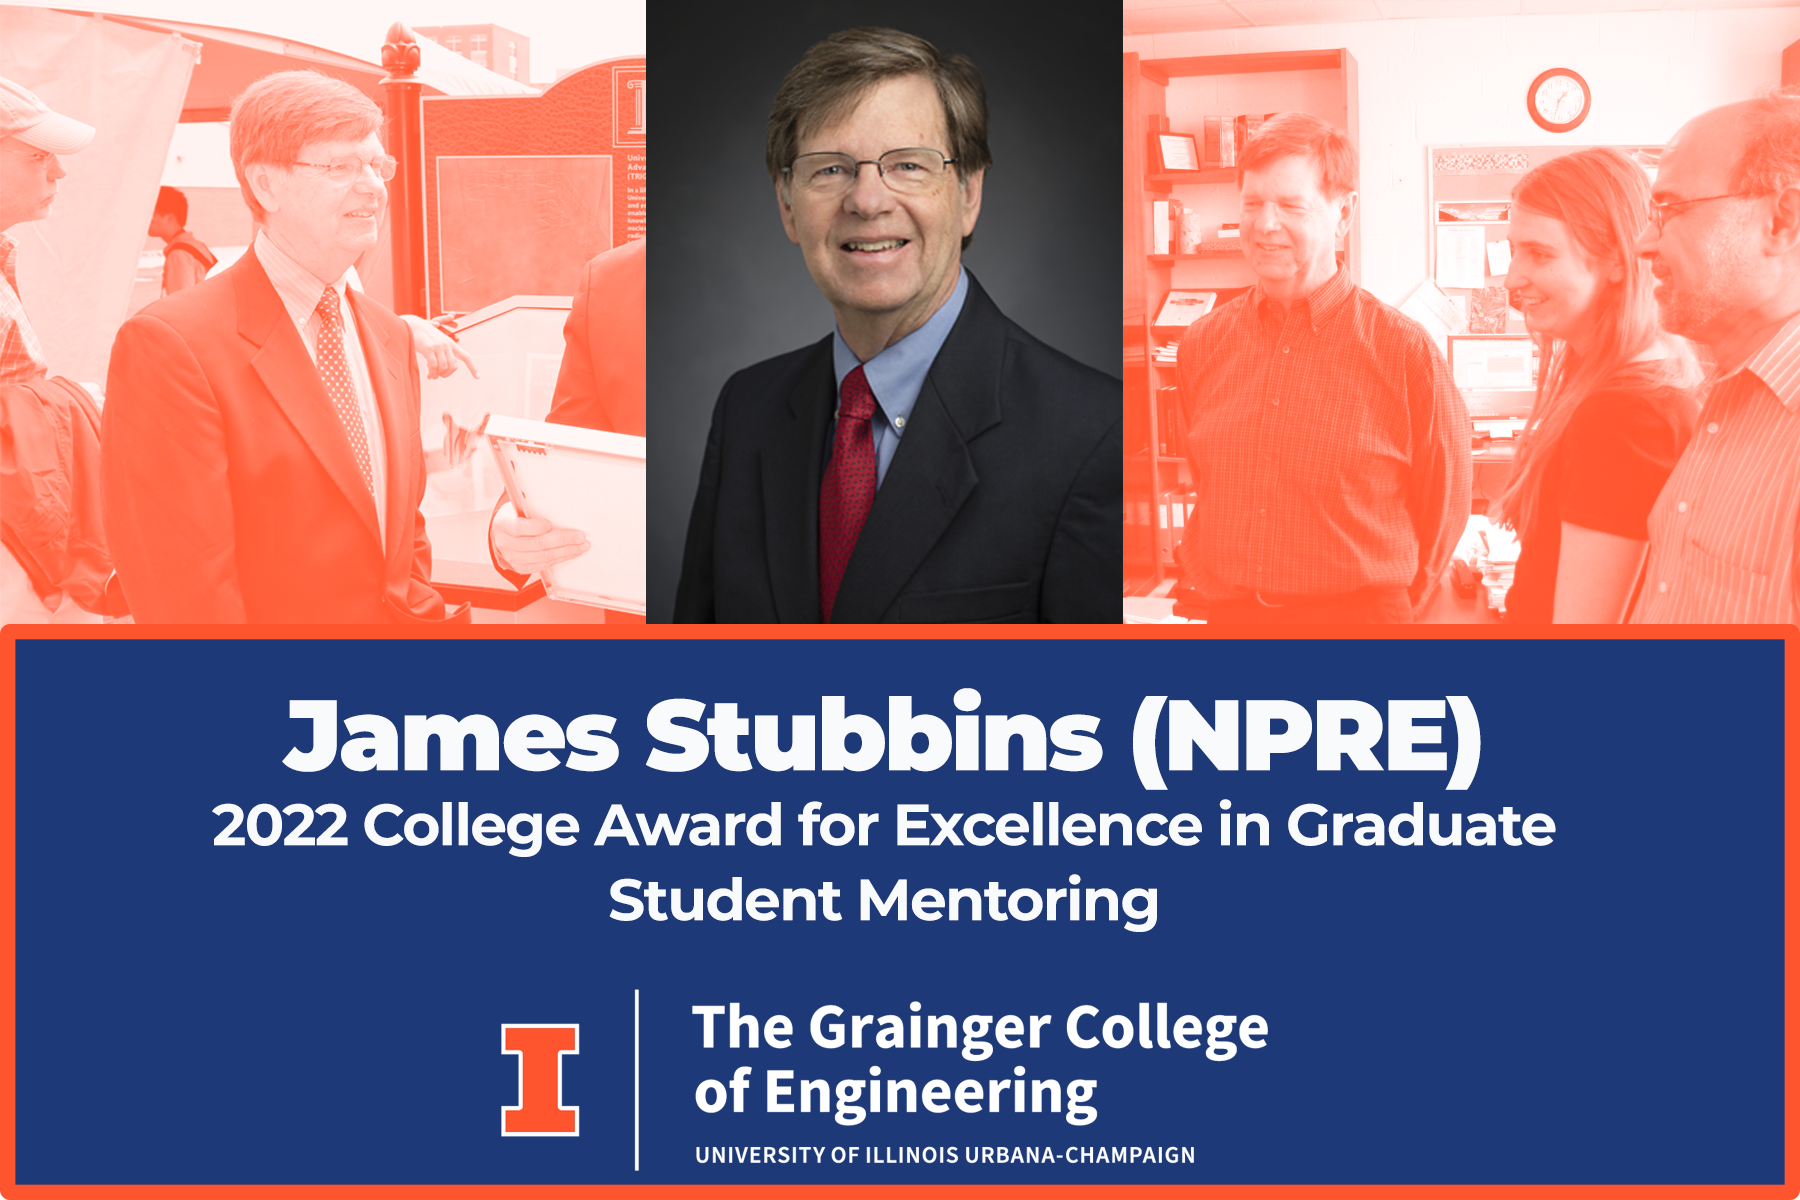 Stubbins wins college award for Excellence in Graduate Student Mentoring